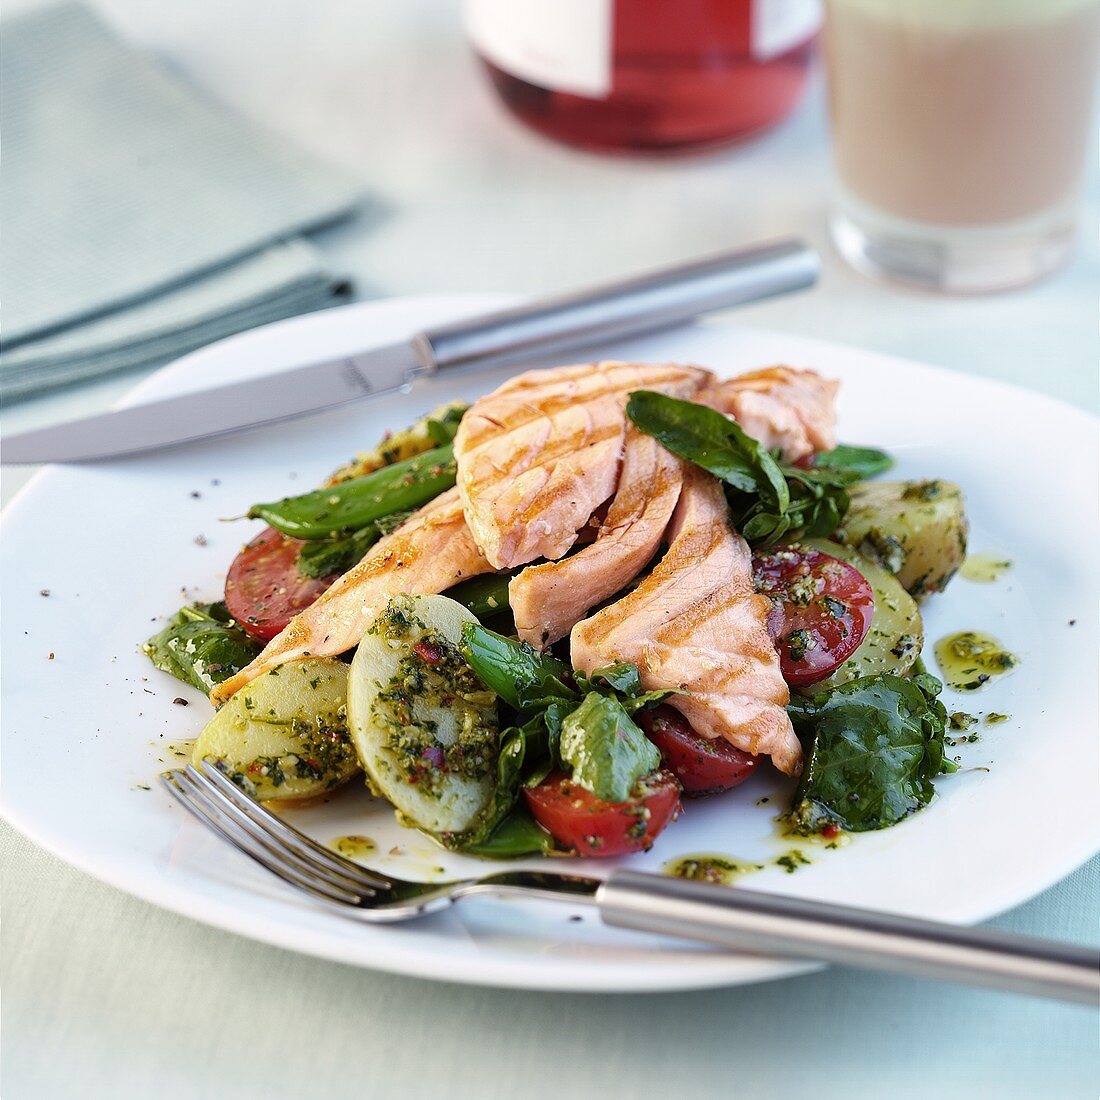 Salmon fillet on lettuce with herb dressing